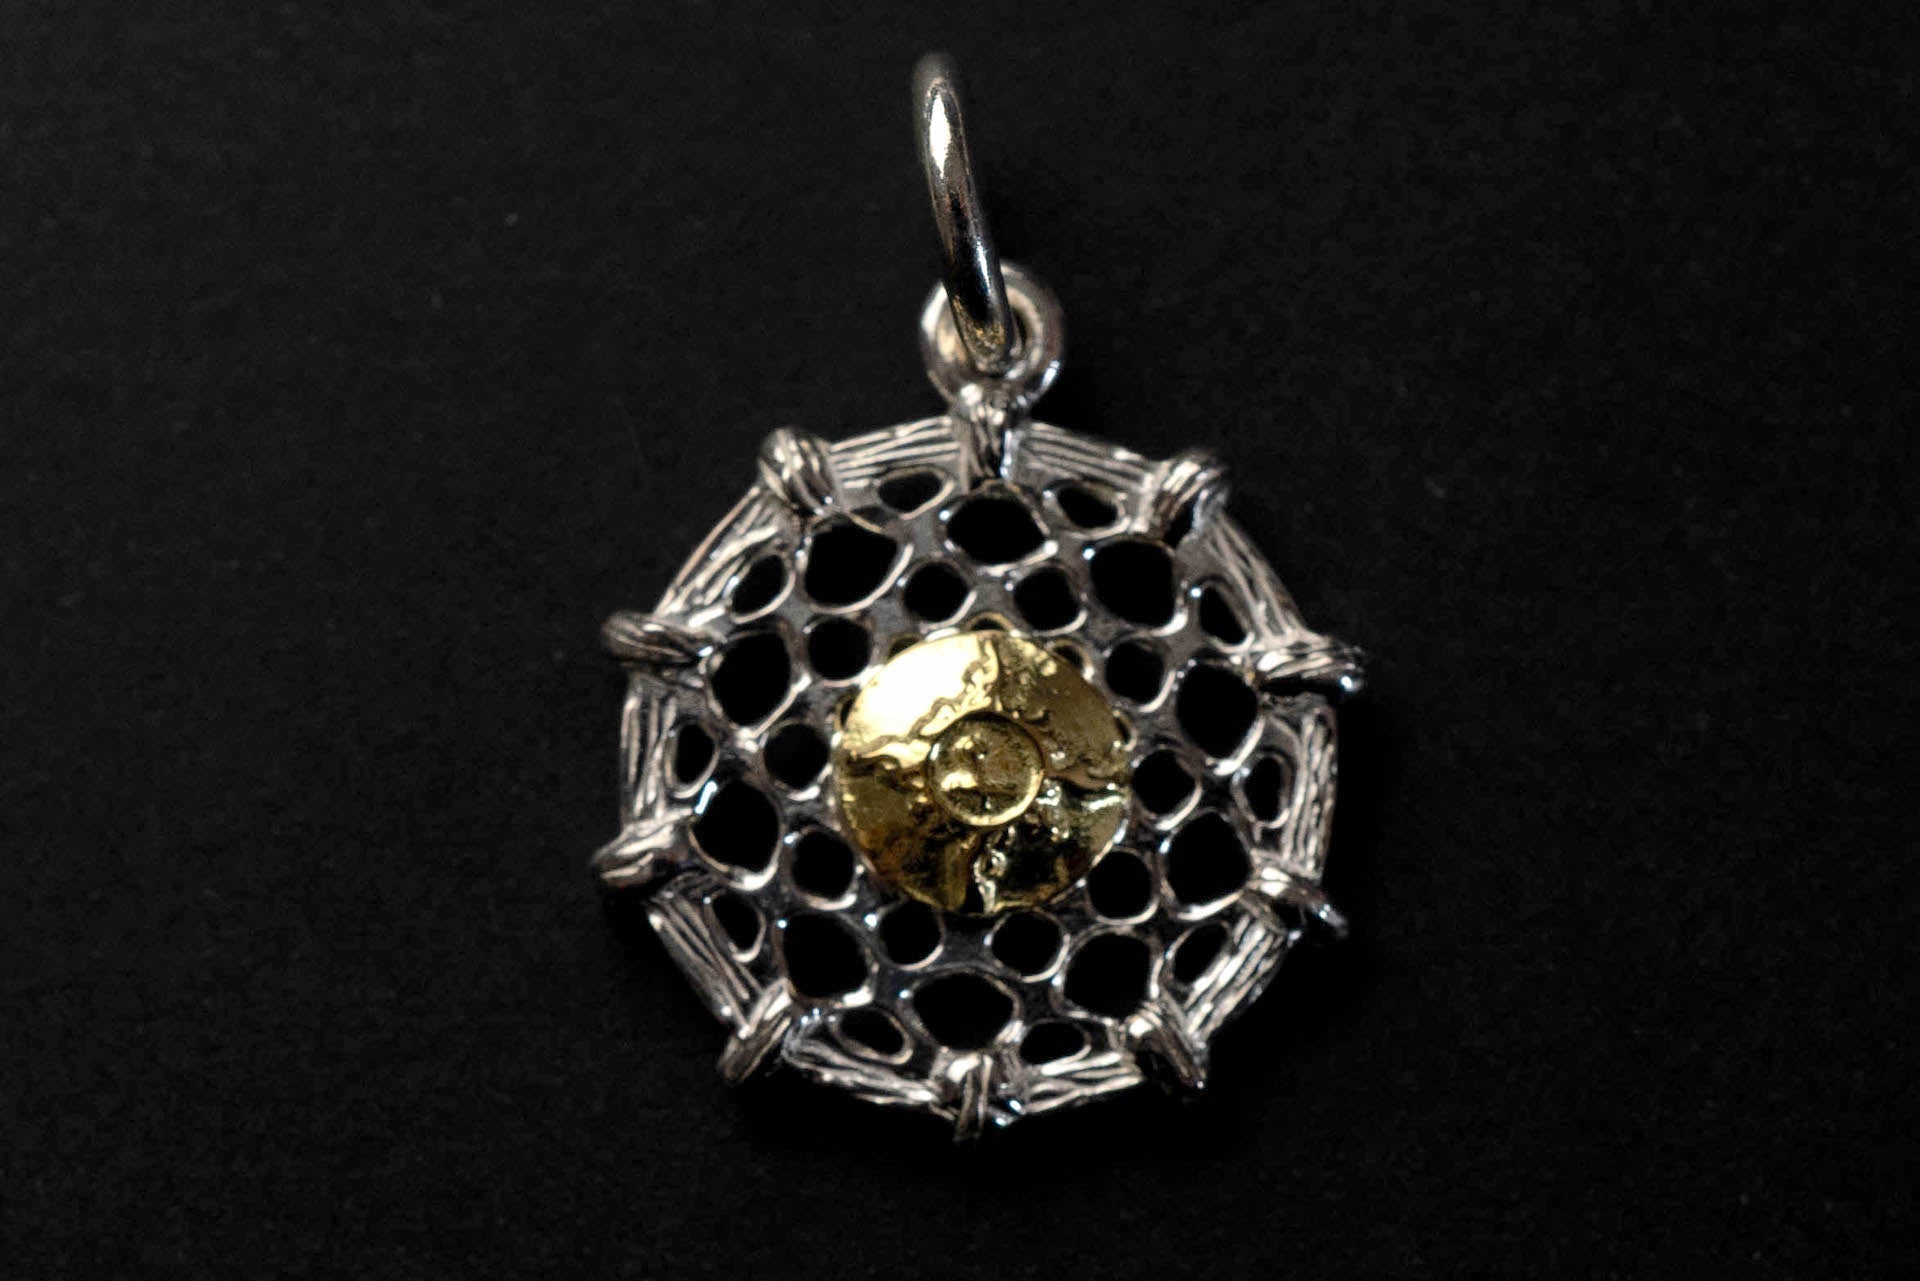 First Arrow's Small "Dream Catcher" Pendant With 18K Gold Emblem (P-726)